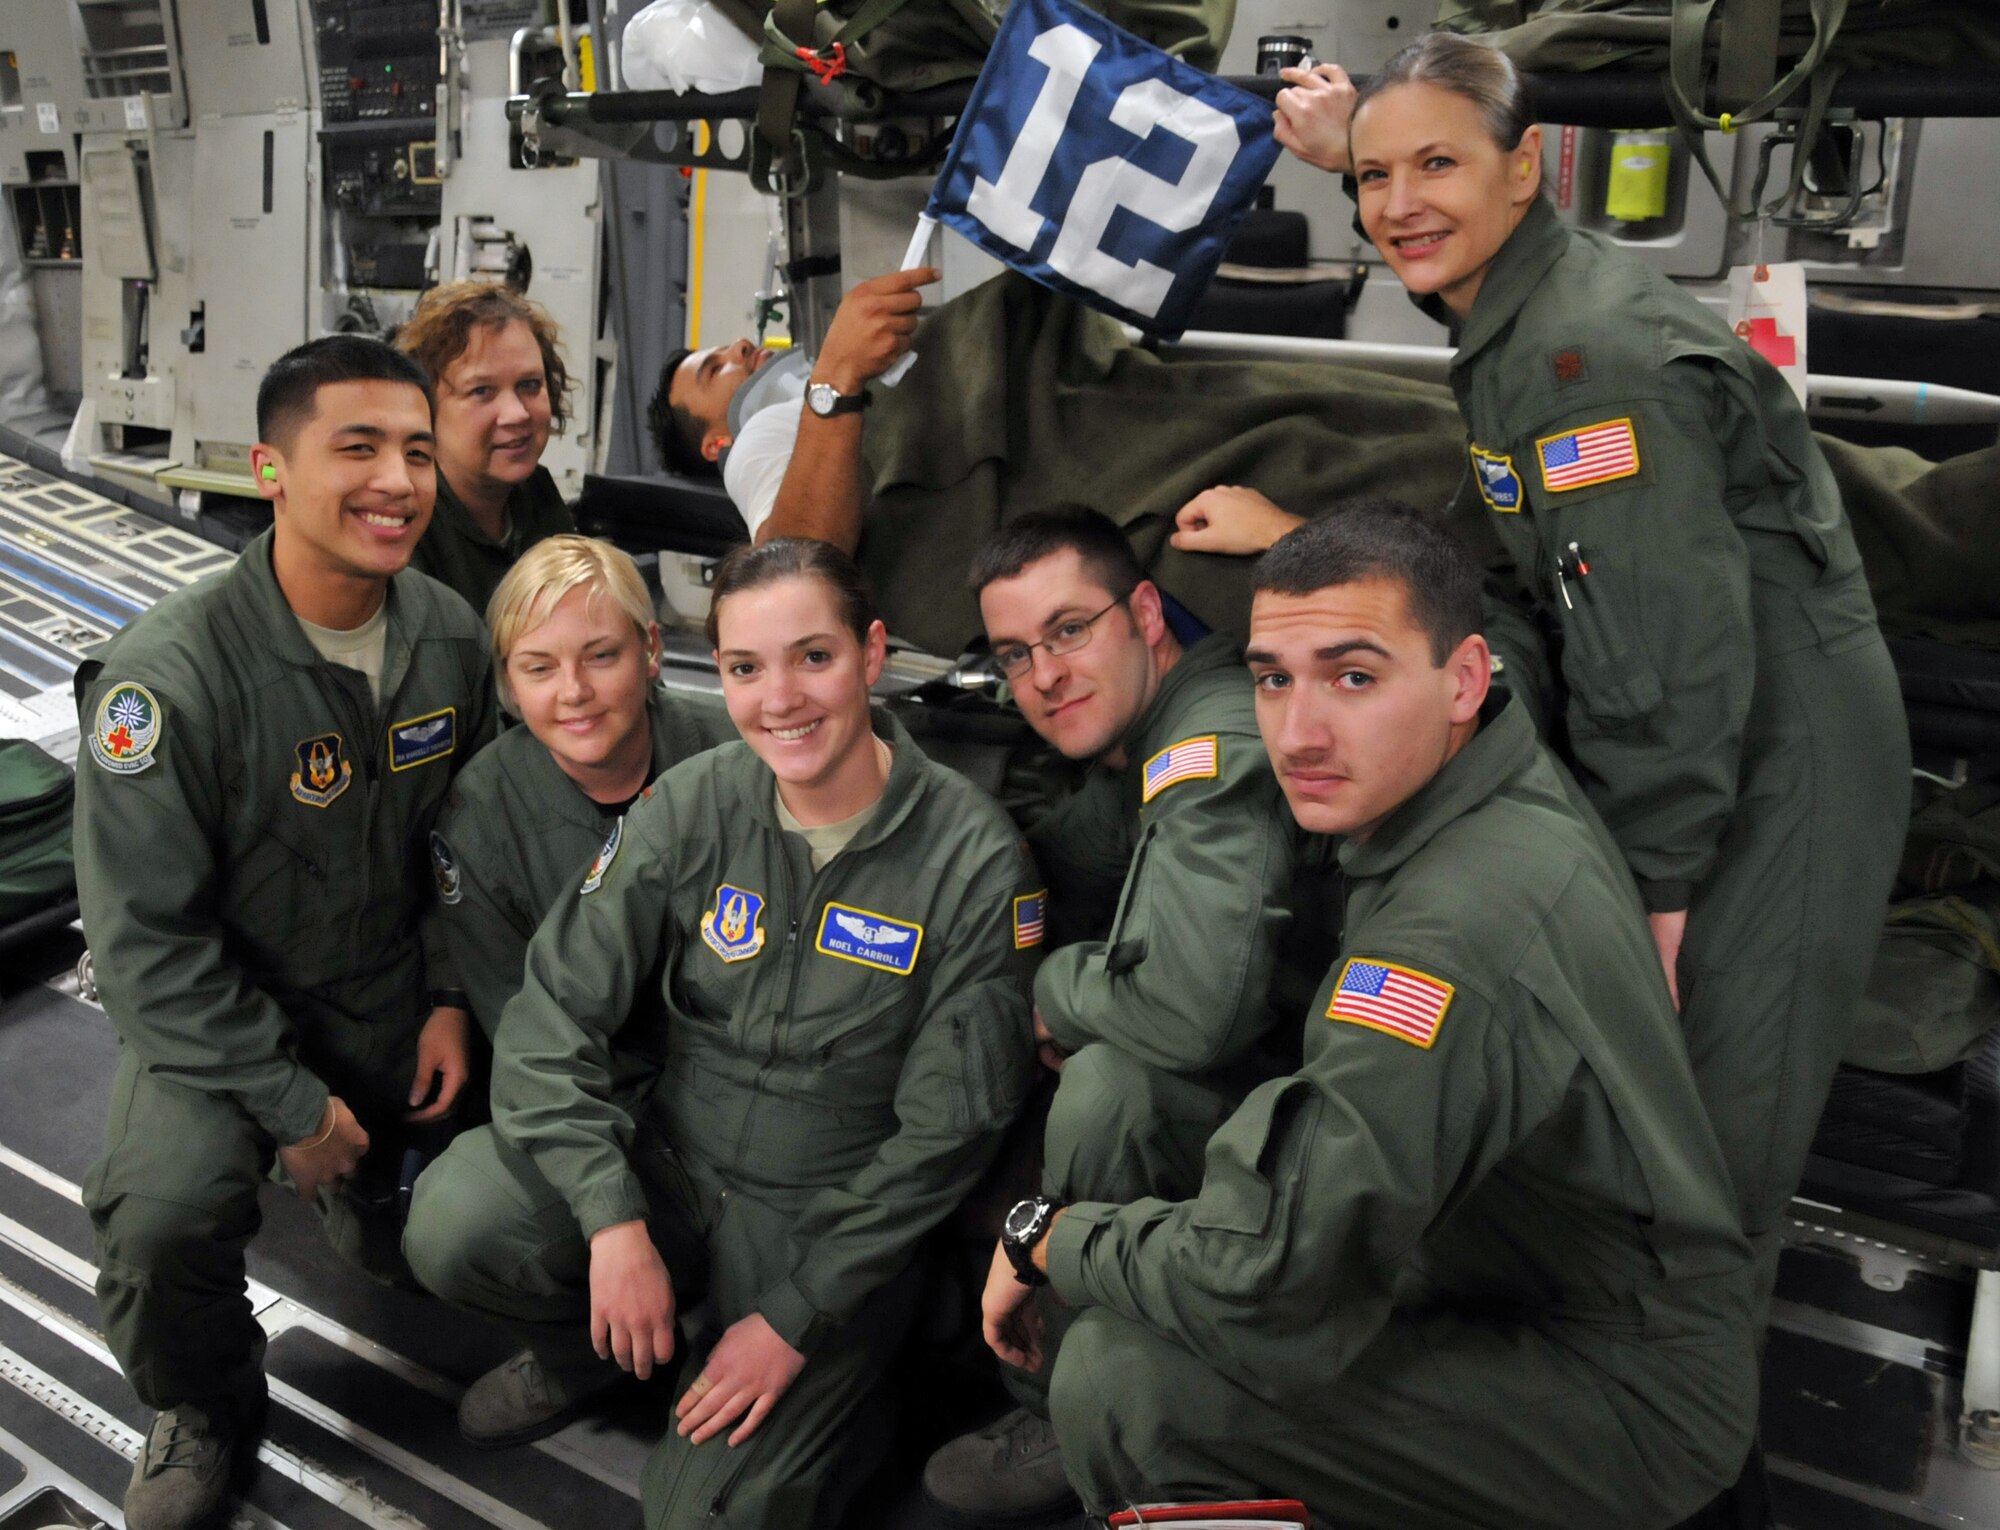 JOINT BASE PEARL HARBOR-HICKAM, Hawaii- Reservists with the 446th Aeromedical Evacuation Squadron out of McChord Field, Wash. take a moment to appreciate the Seattle Seahawks' Spirit of the 12th Man during a training mission here. Capt. Lee Wilkerson, a KC-135 Stratotanker pilot from Spokane, Wash., who injured his neck in Hawaii, helps the crew with "raising" the 12th Man flag. The concept is a way of letting the Seahawks' organization know how much the 446th Airlift Wing appreciates the support that the organization has for the military and how that support is felt with the Reservists serving all over the world. (U.S. Air Force photo/Master Sgt. Jake Chappelle)
